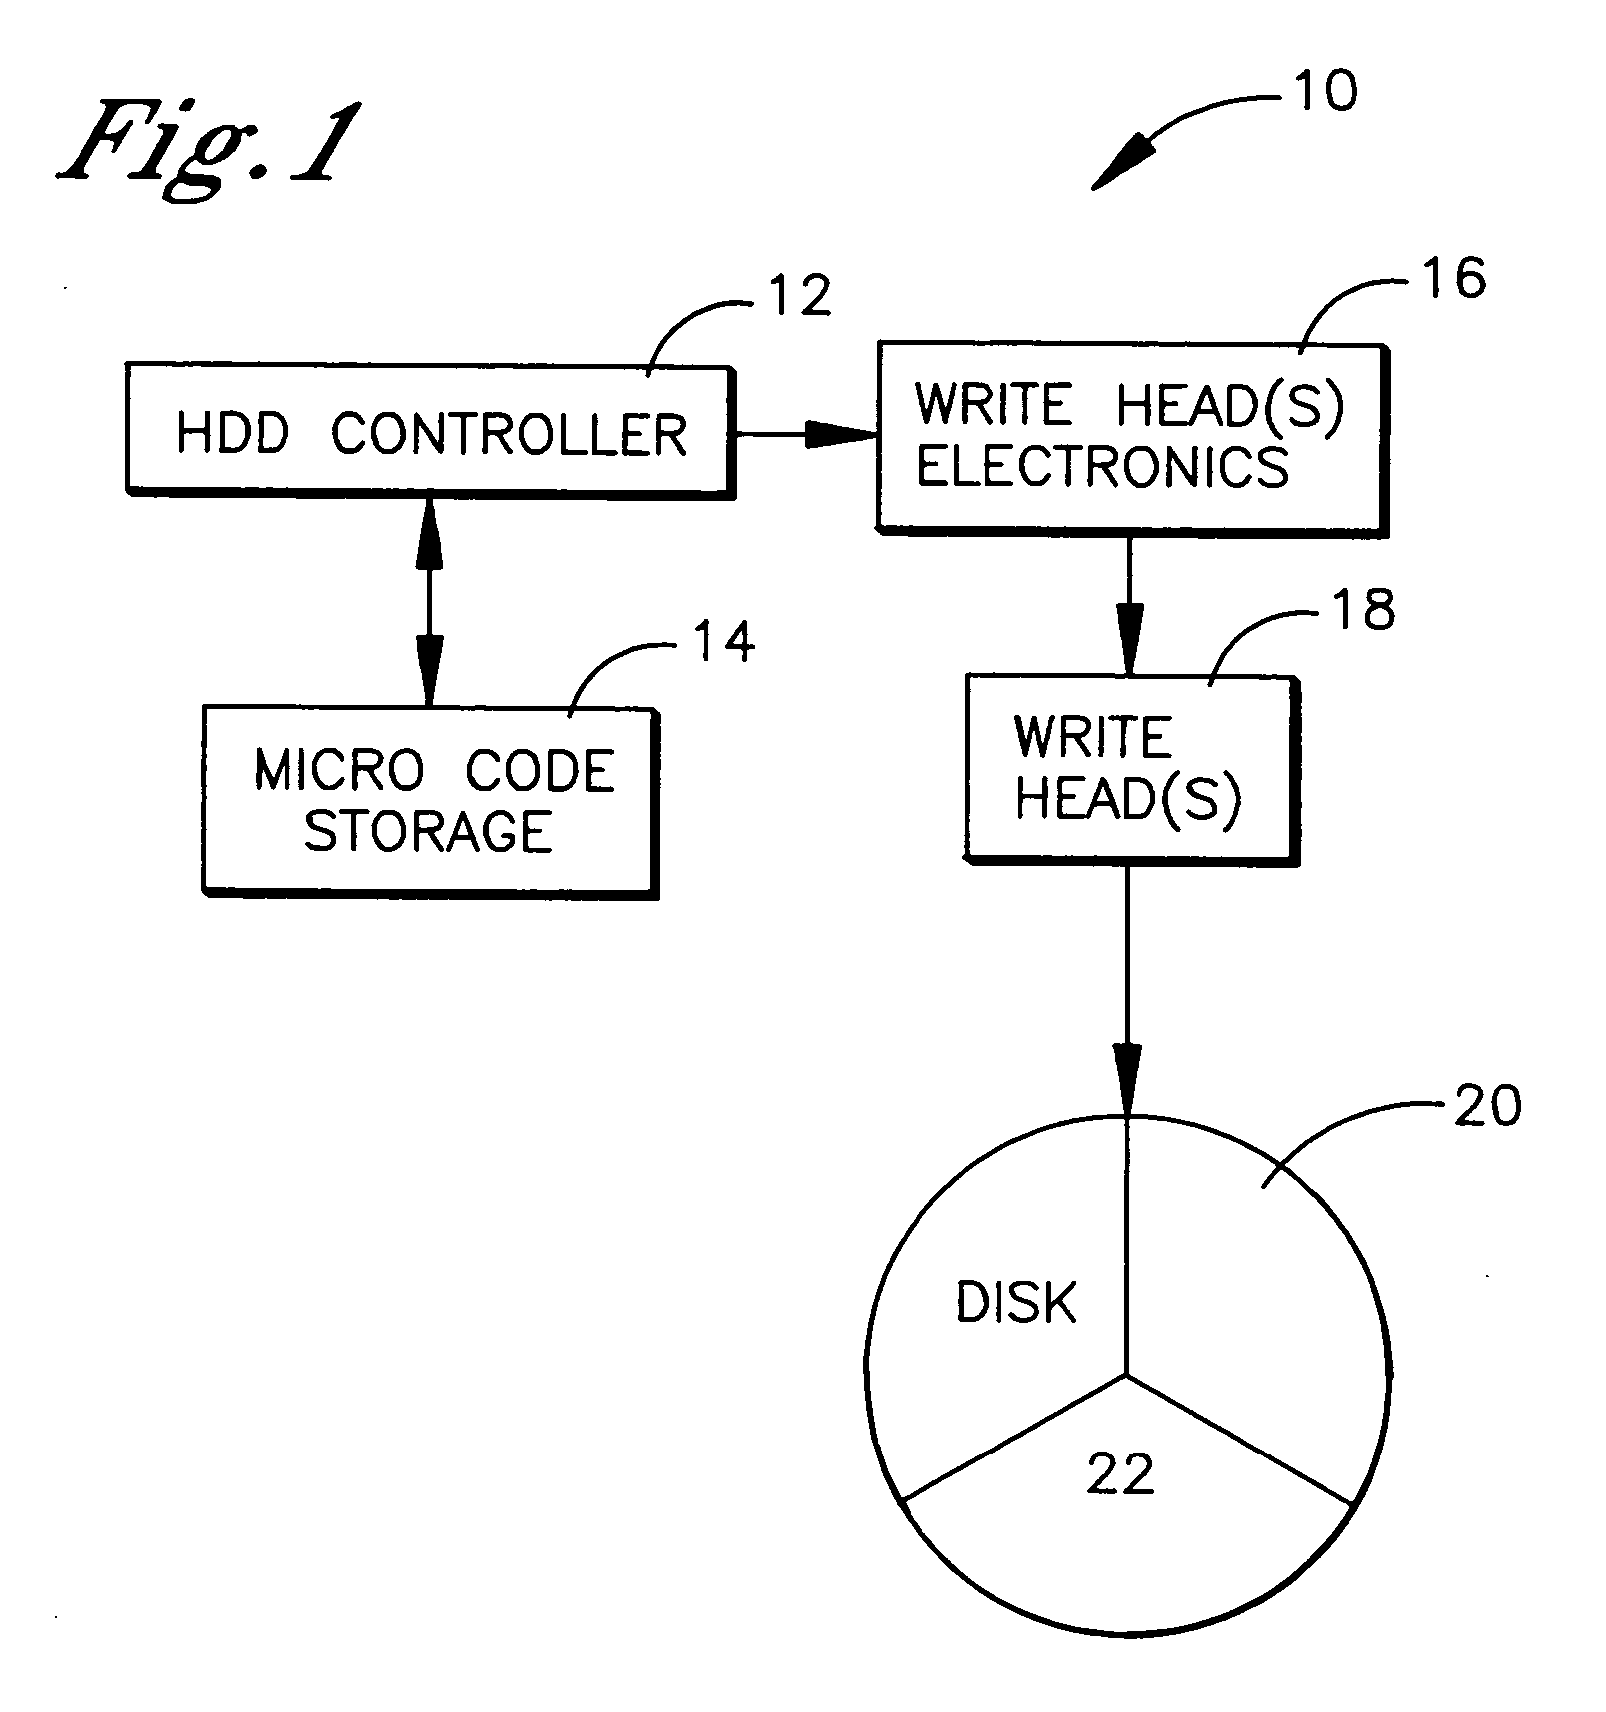 System and method for onboard HDD defragmentation and combining multiple G-list entries